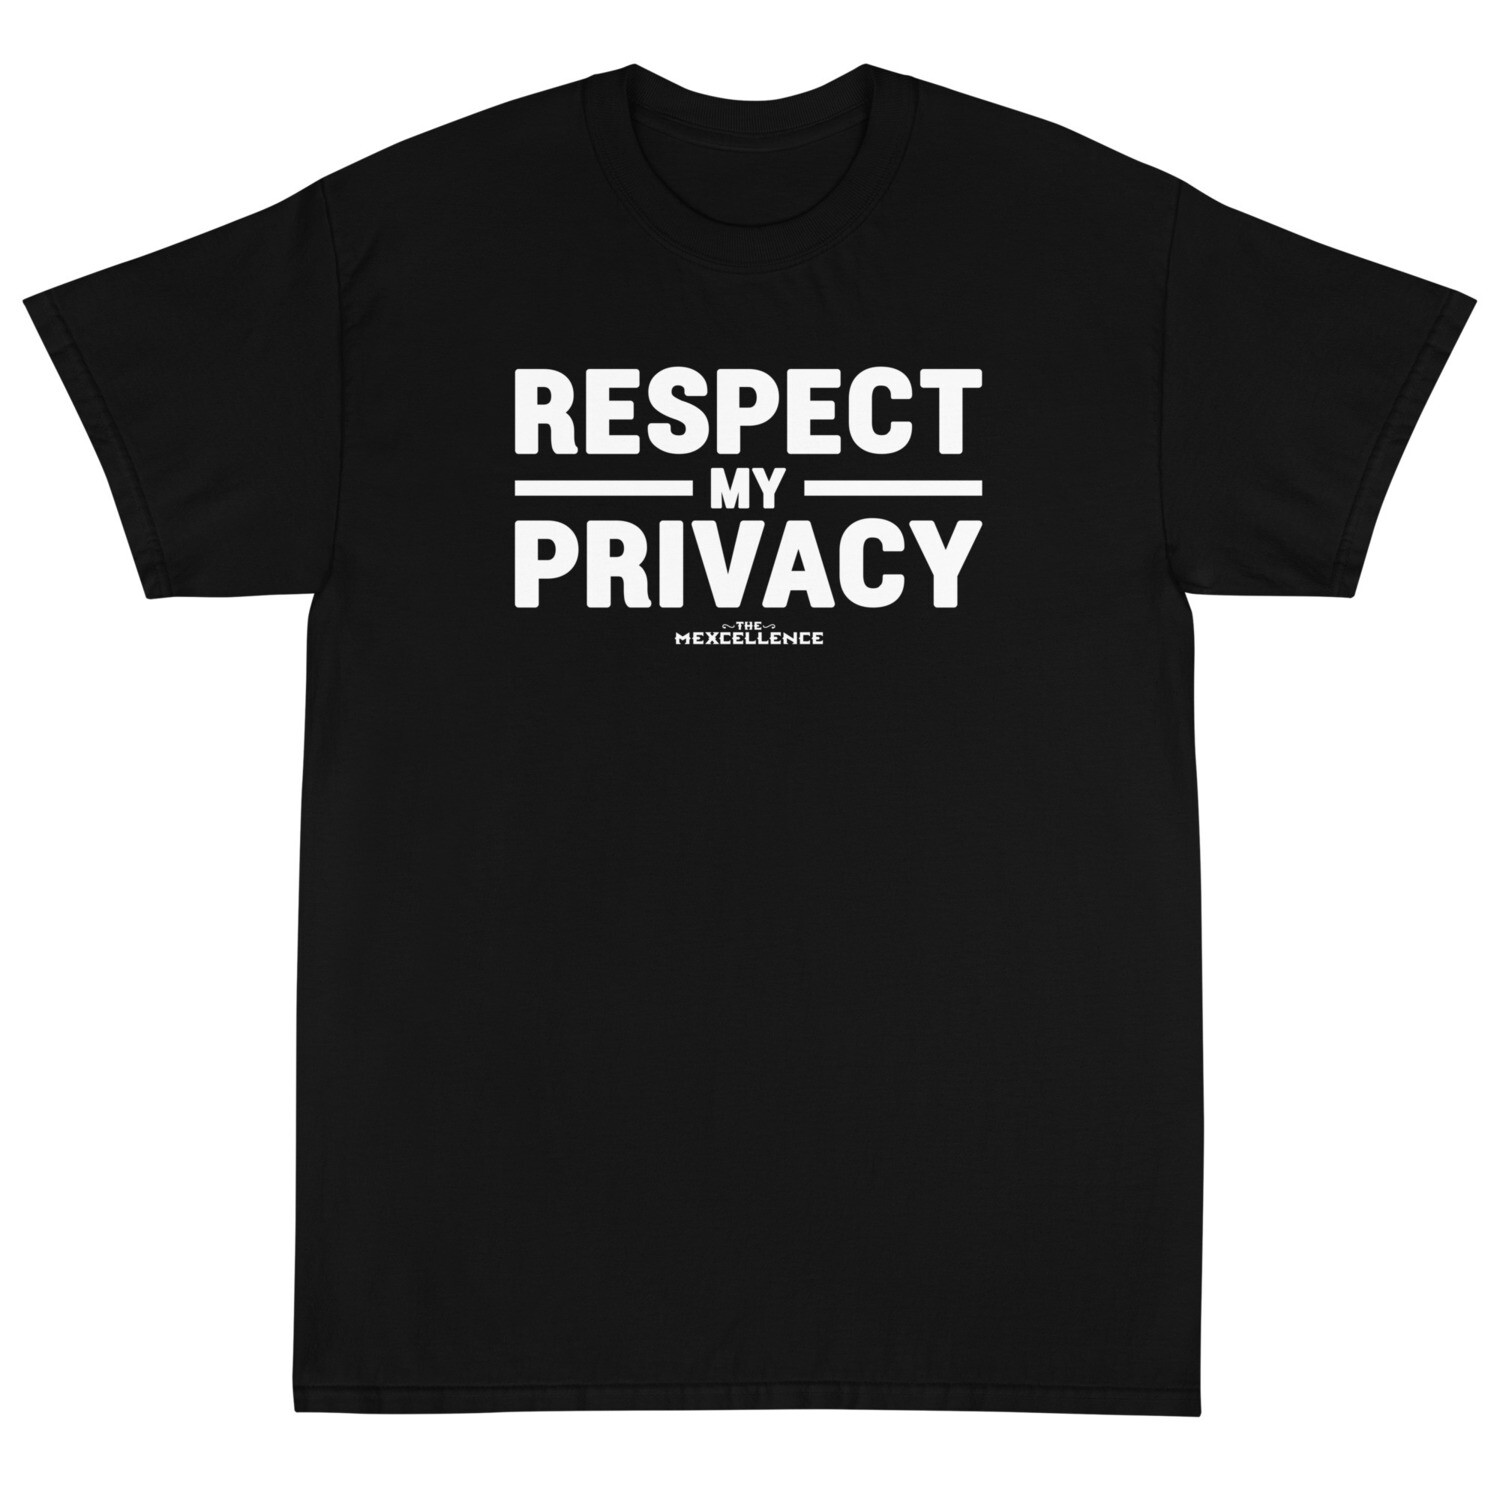 Respect My Privacy Short-Sleeve Unisex T-Shirt